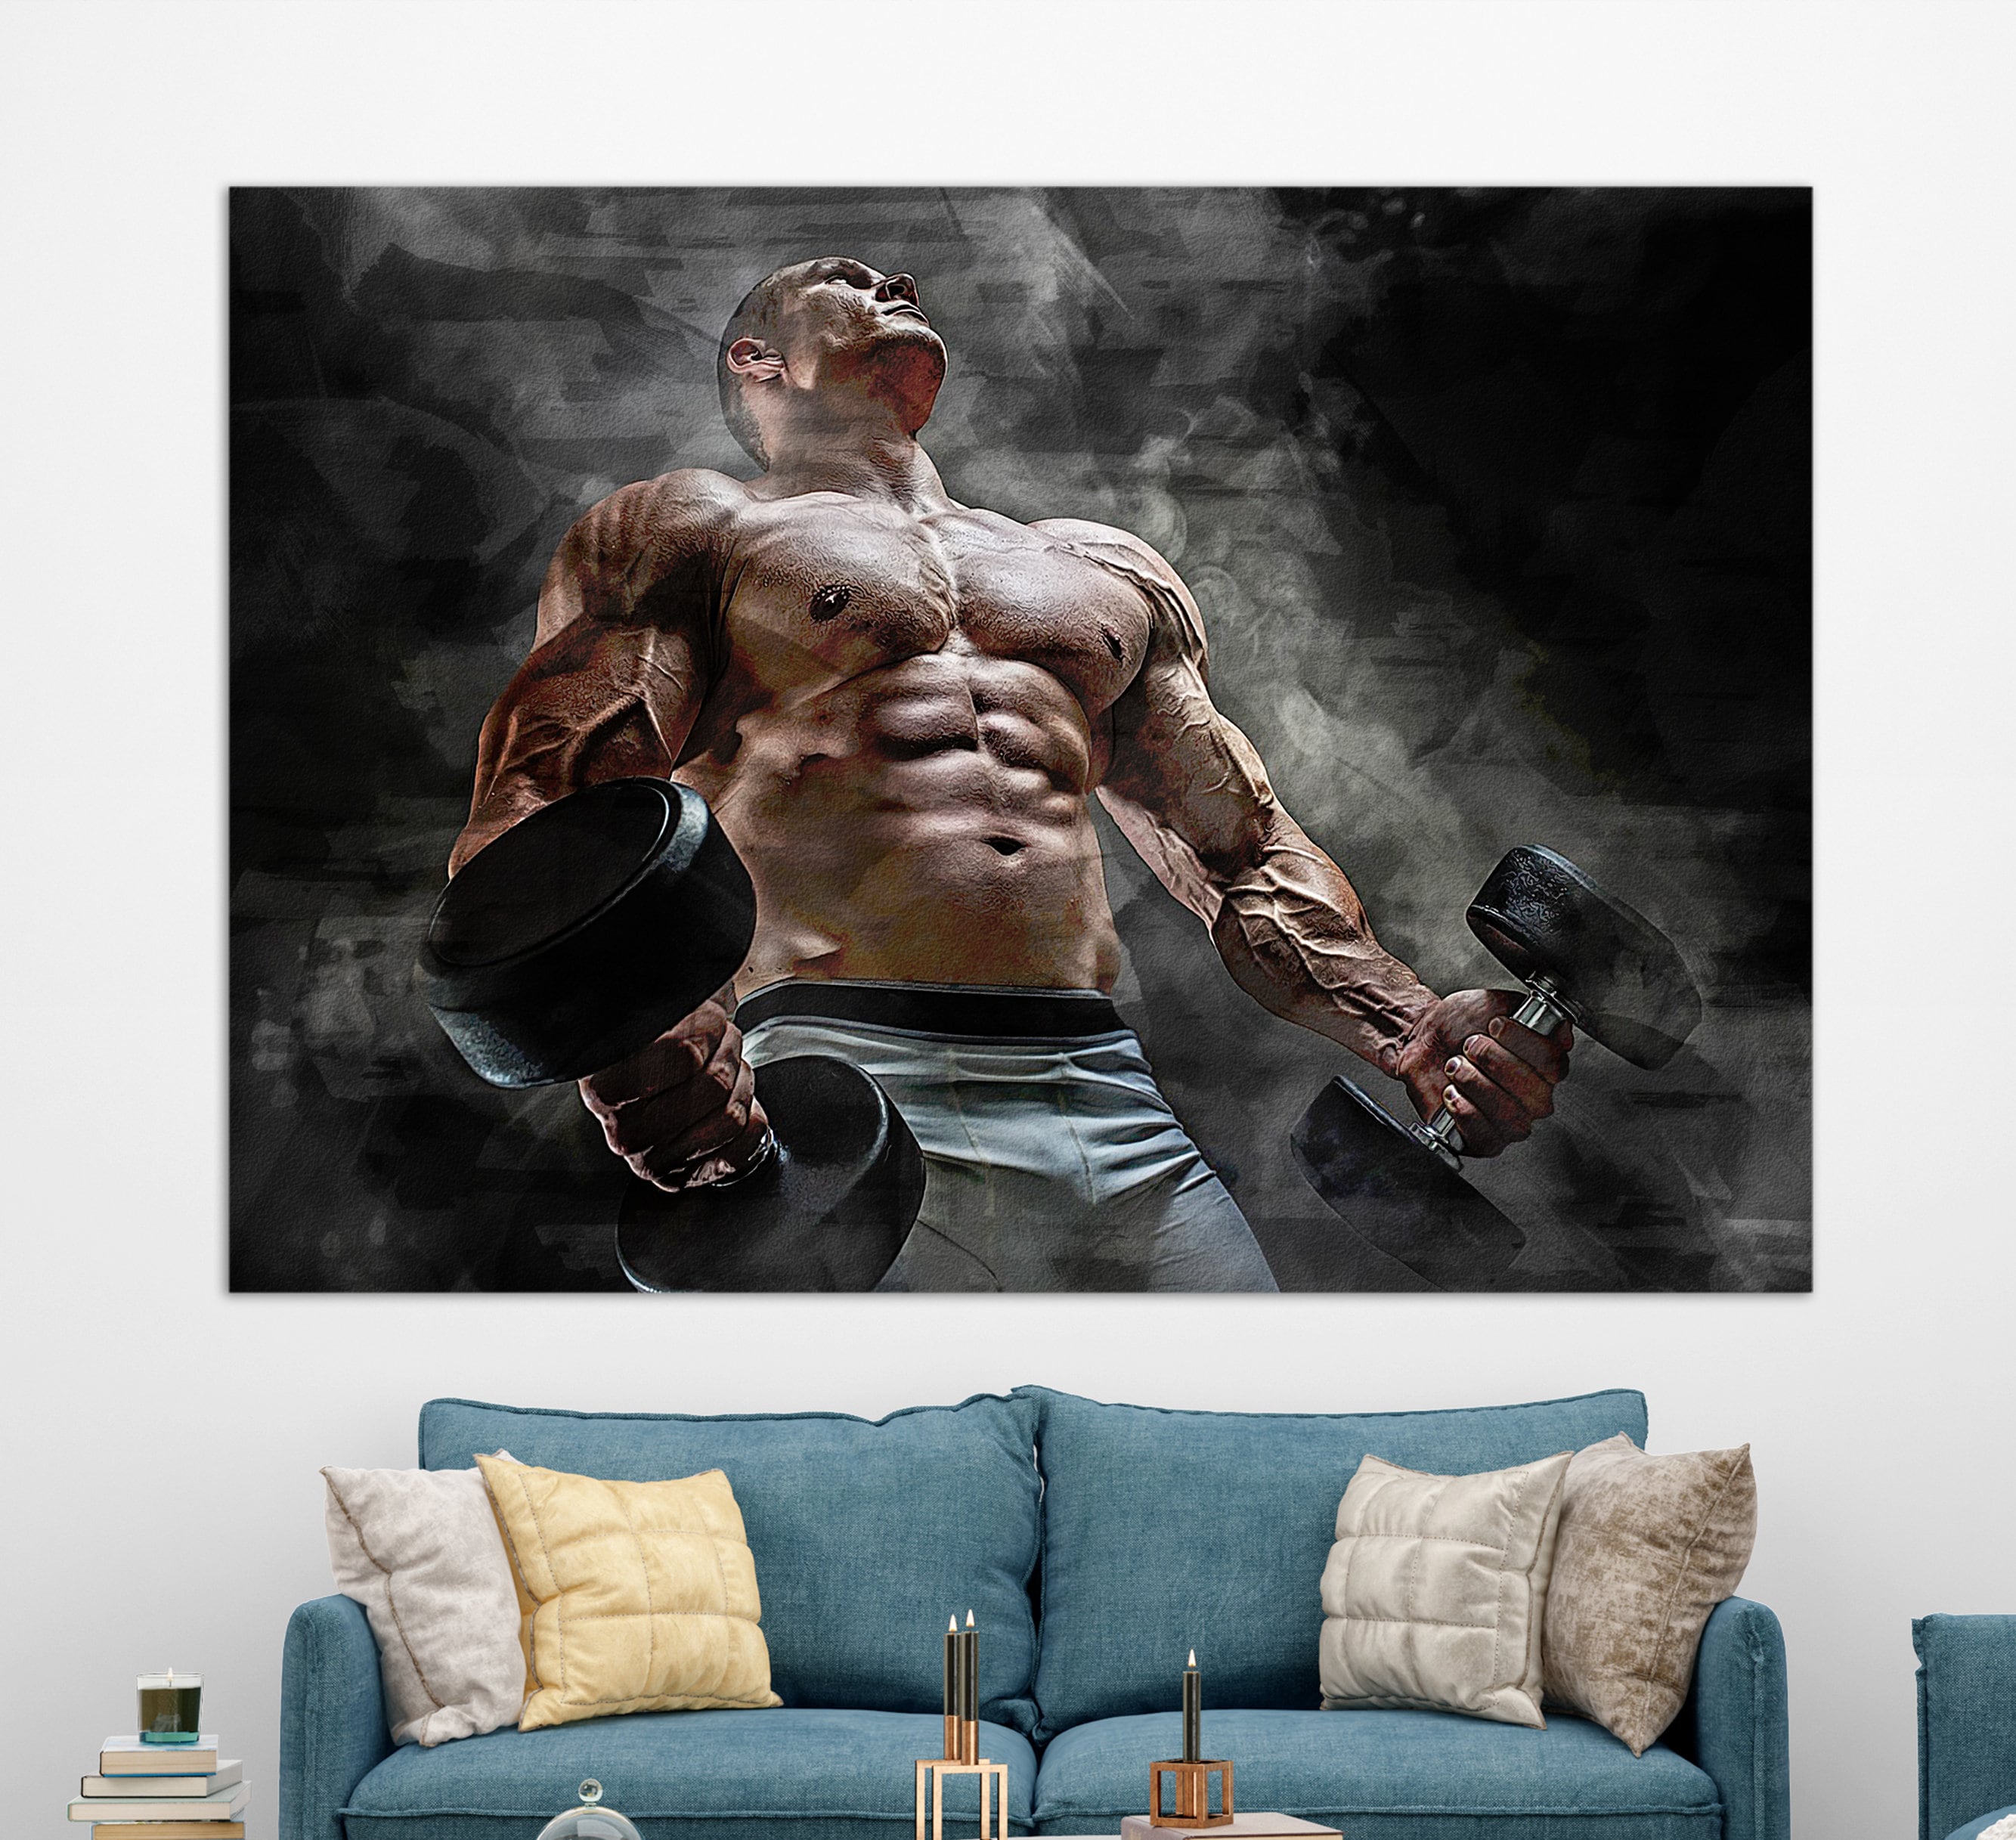 Weightlifting Gifts, Weightlifting Photo Collage, Weightlifting Wall Art,  Weightlifting Artwork, Weightlifting Prints - Stunning Gift Store